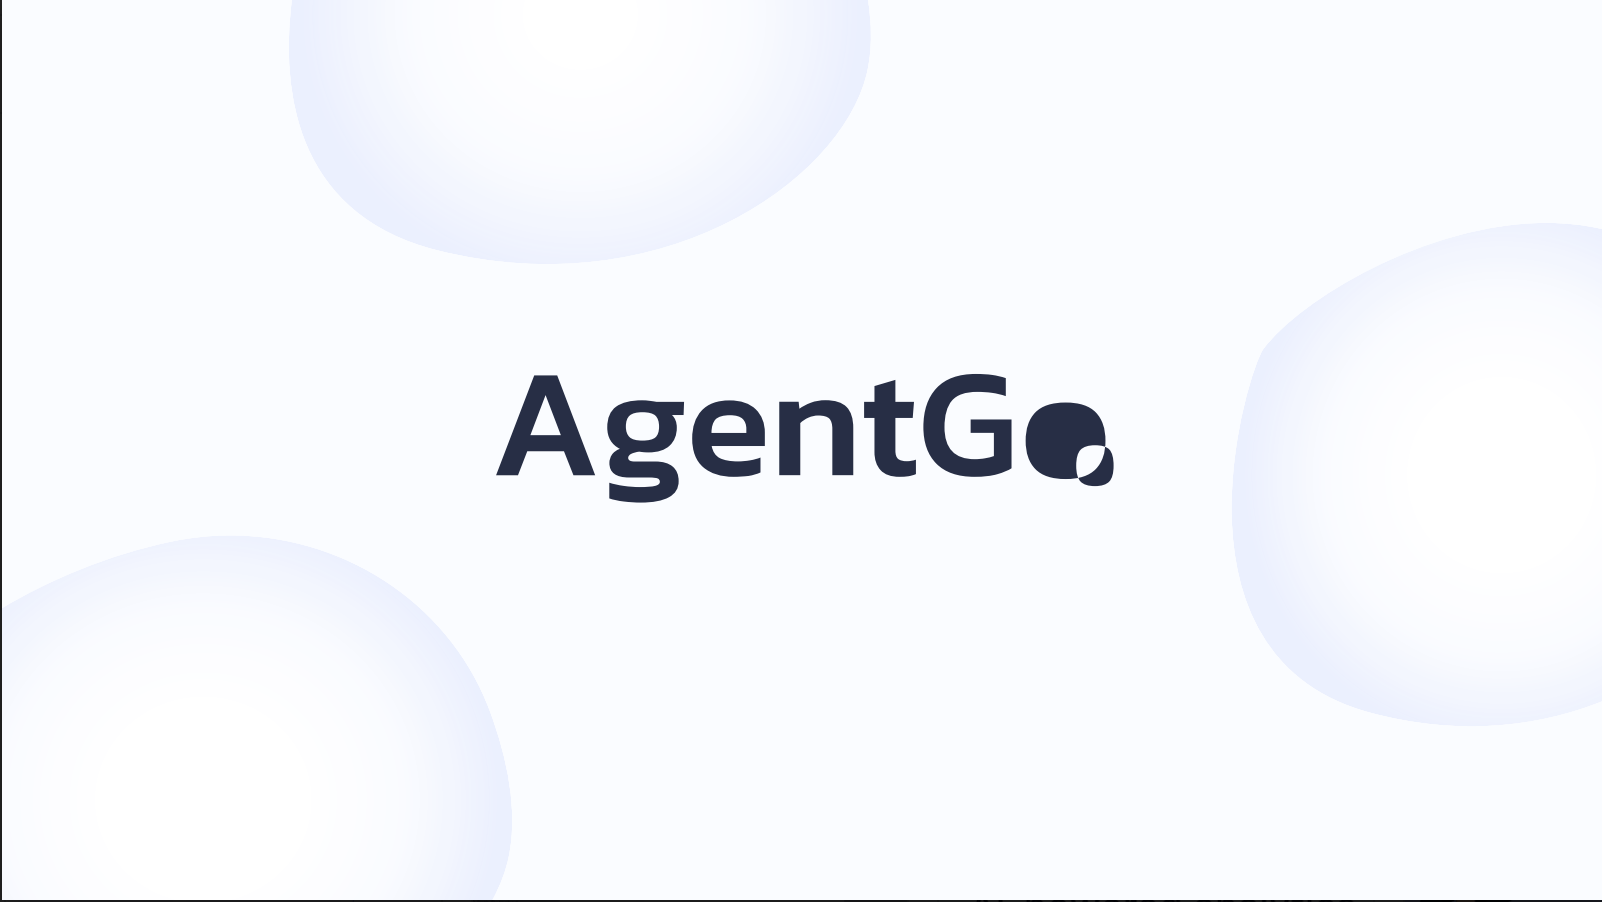 What is AgentGo?